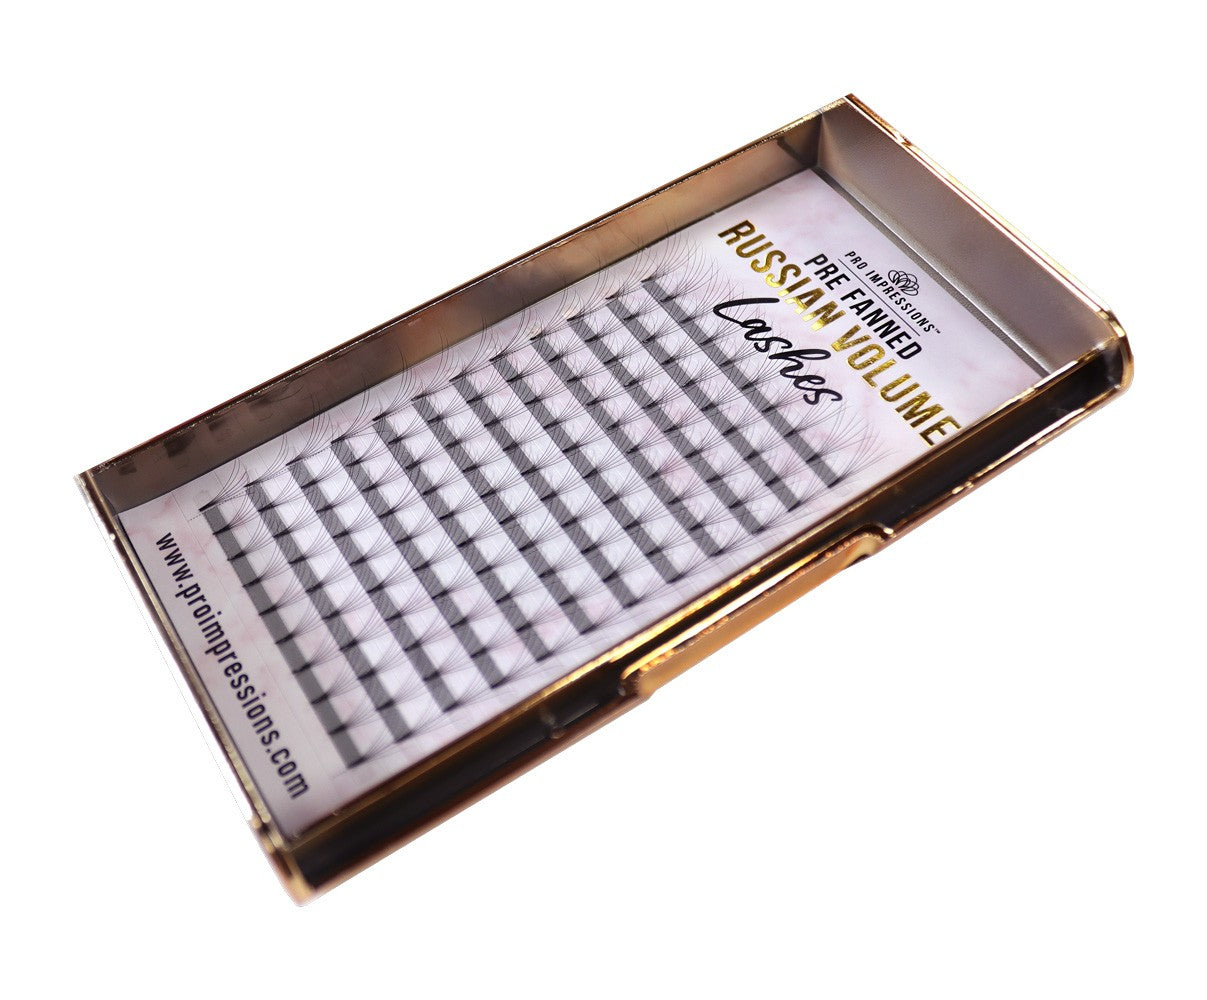 Pre-Fanned 6D Russian Volume Lashes (One Length Per Pack)